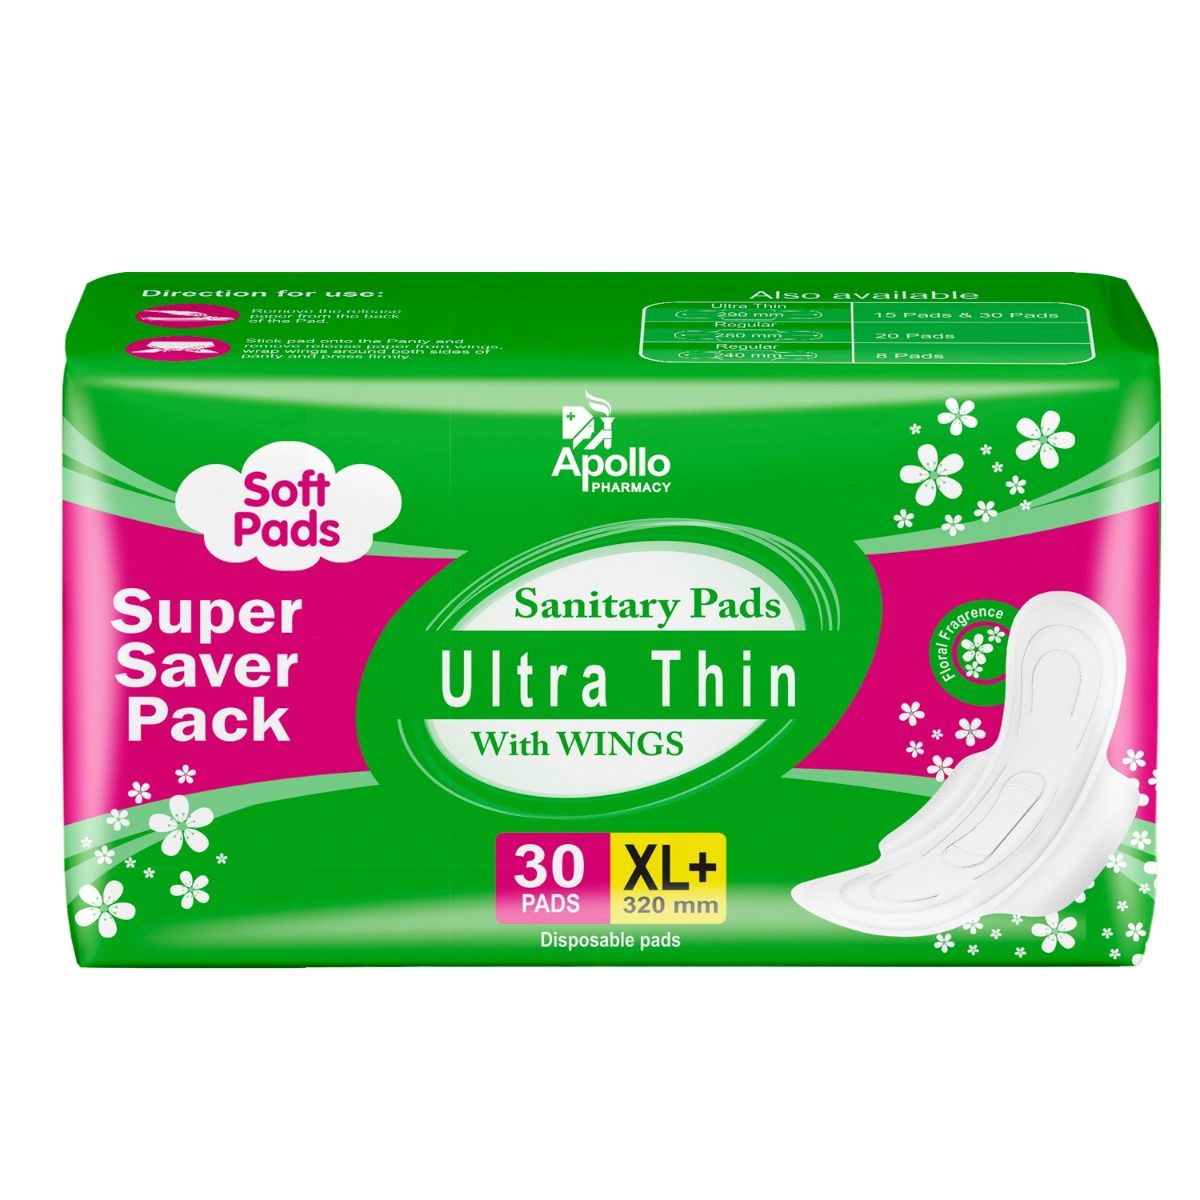 Buy Apollo Pharmacy Ultrathin Sanitary Pads XL+ with Wings, 30 Count Online